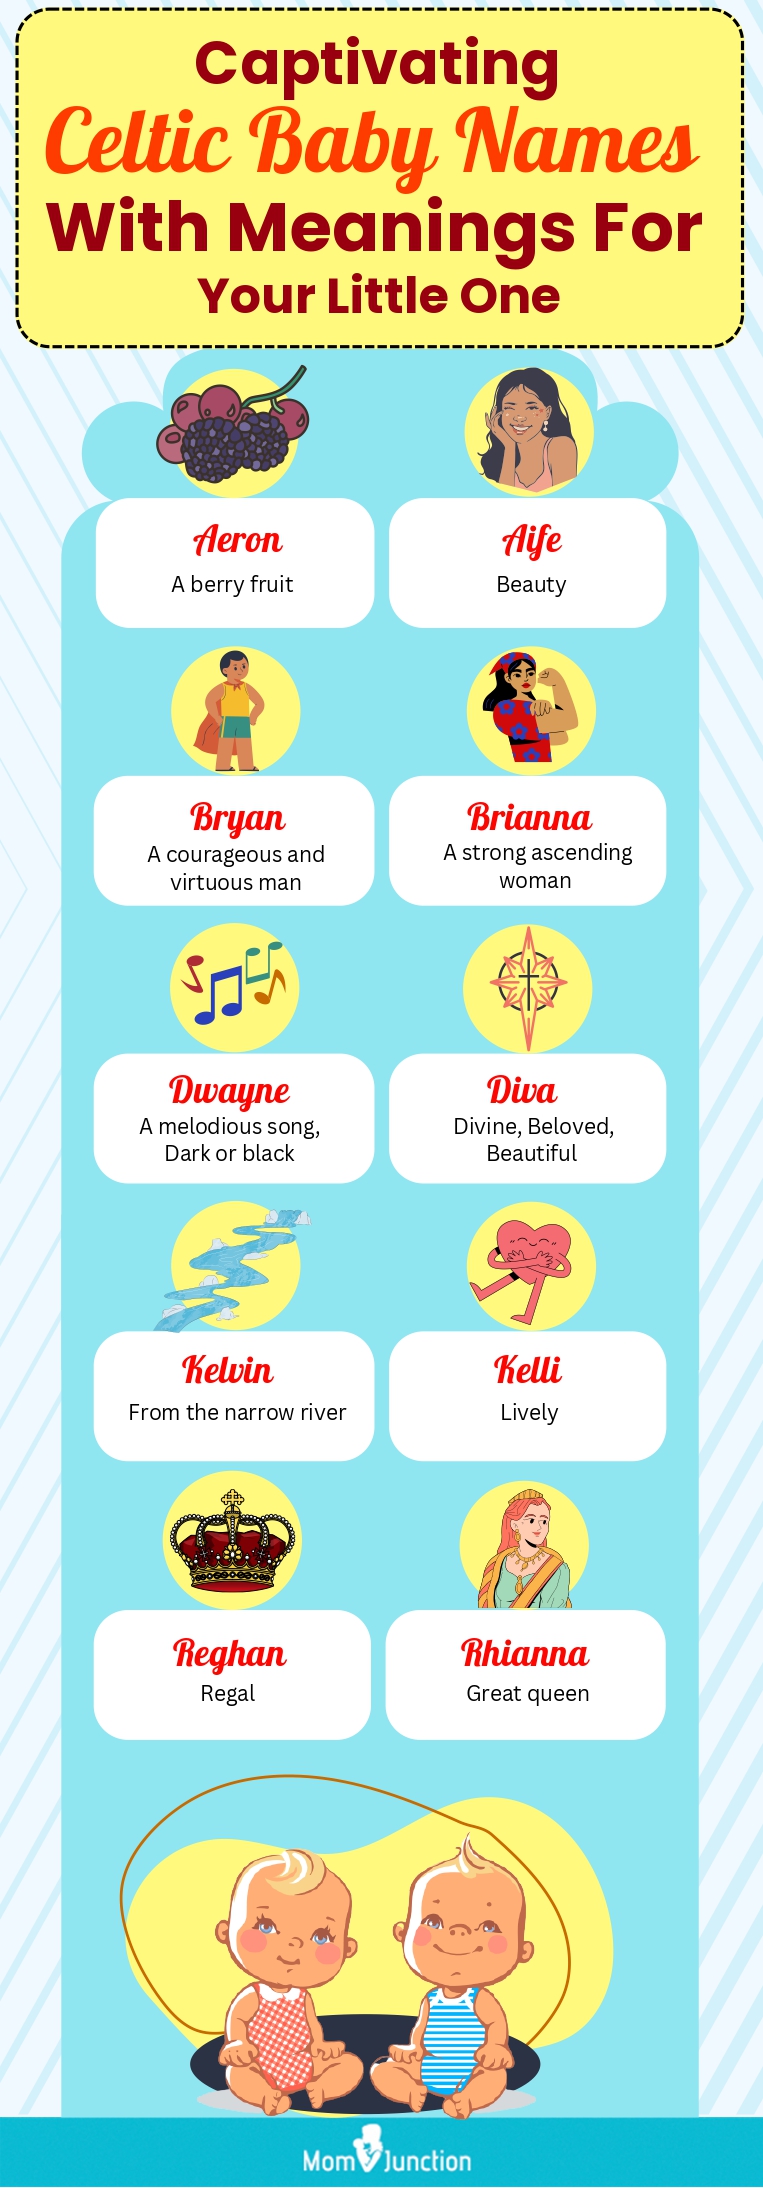 captivating celtic baby names with meanings for your little one (infographic)